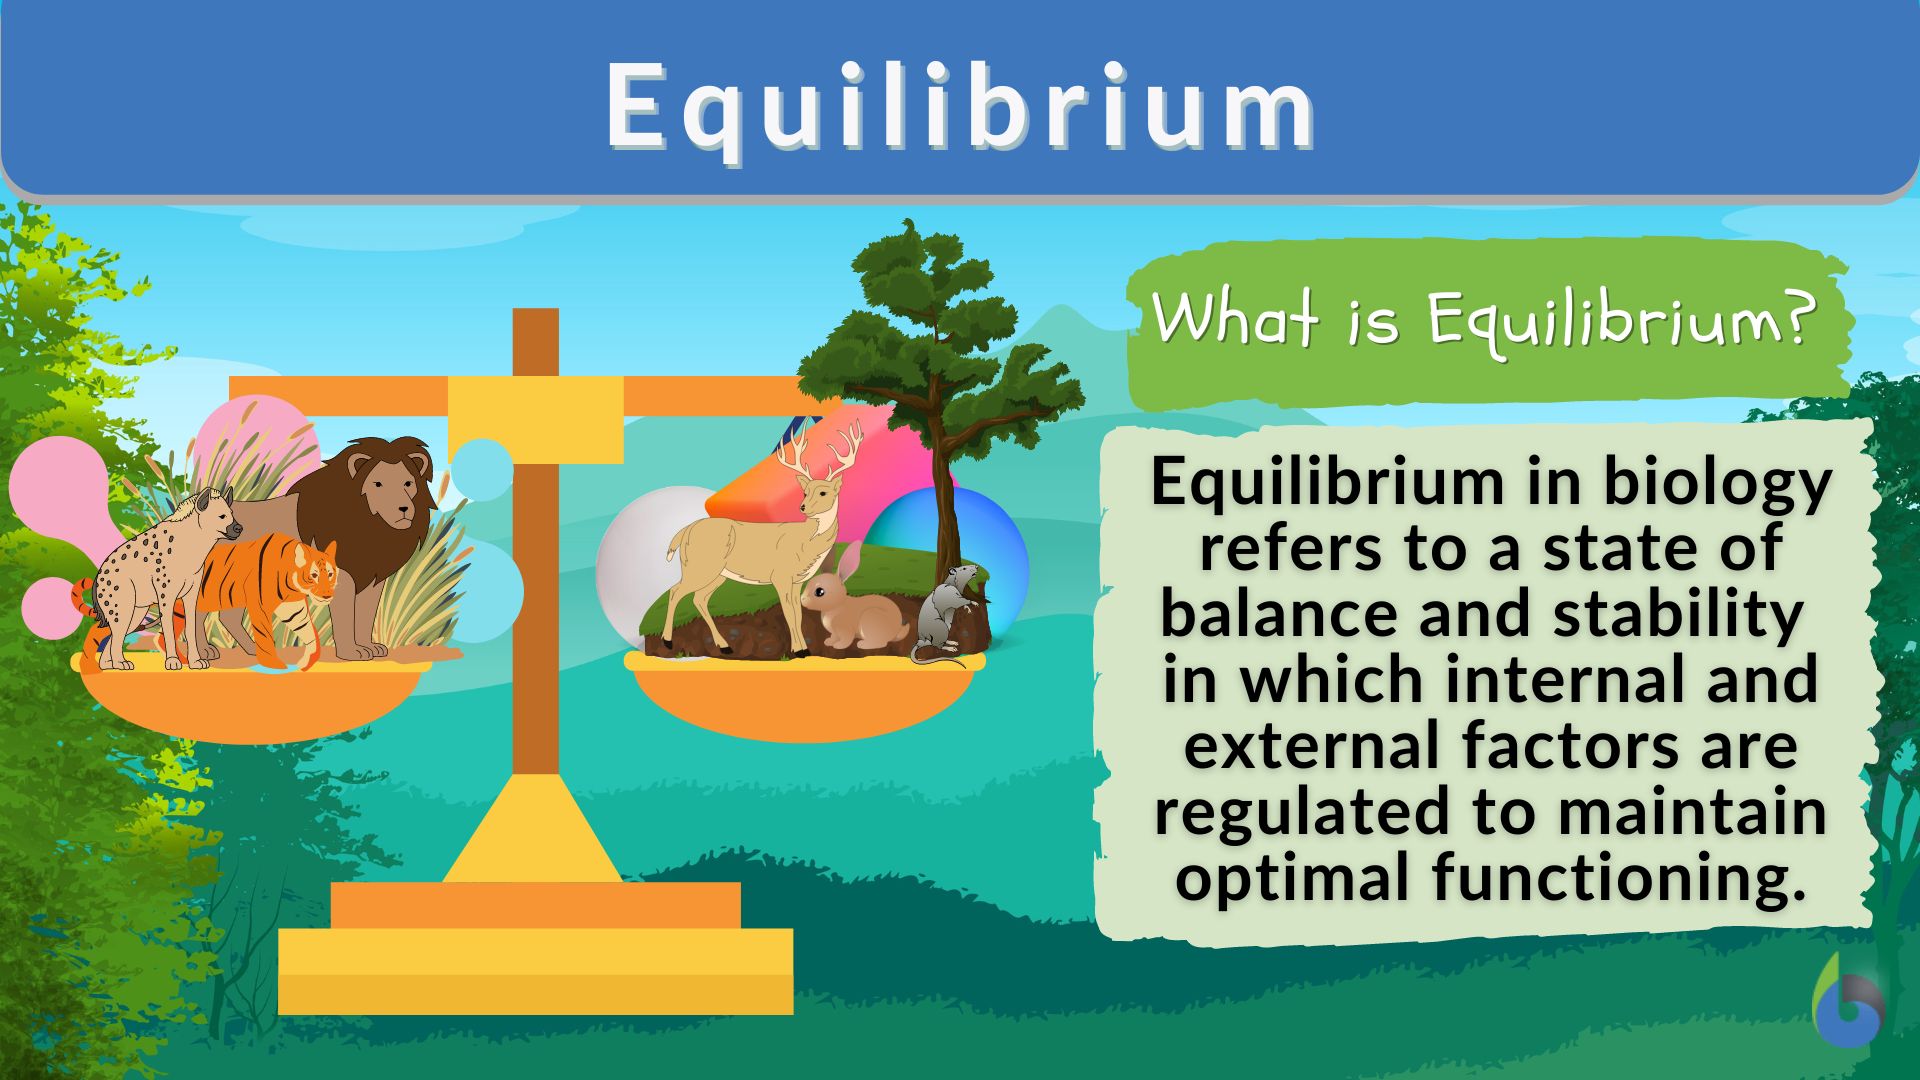 Equilibrium - Definition and Examples - Biology Online Dictionary